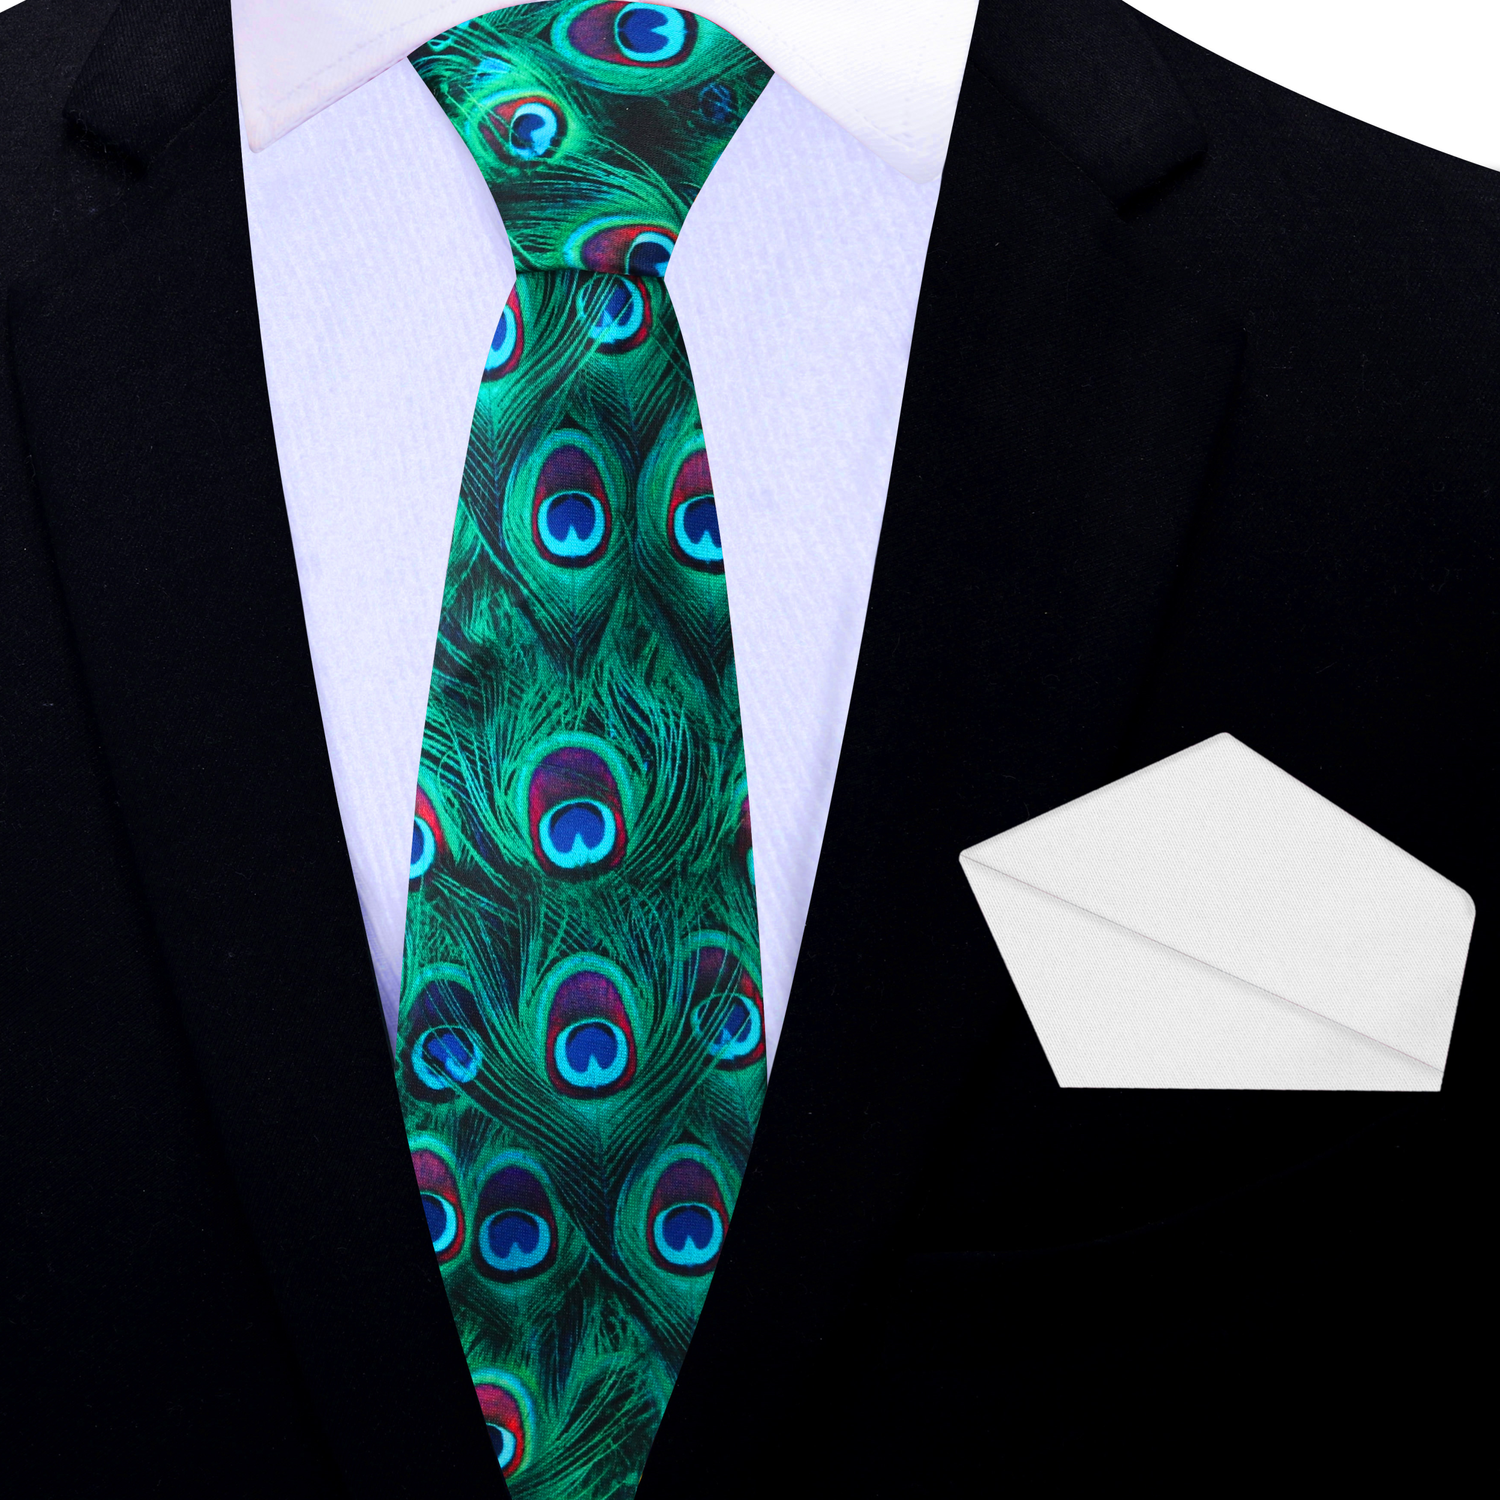 Thin Tie: Green, Blue, Red Peacock Feather Tie and White Square